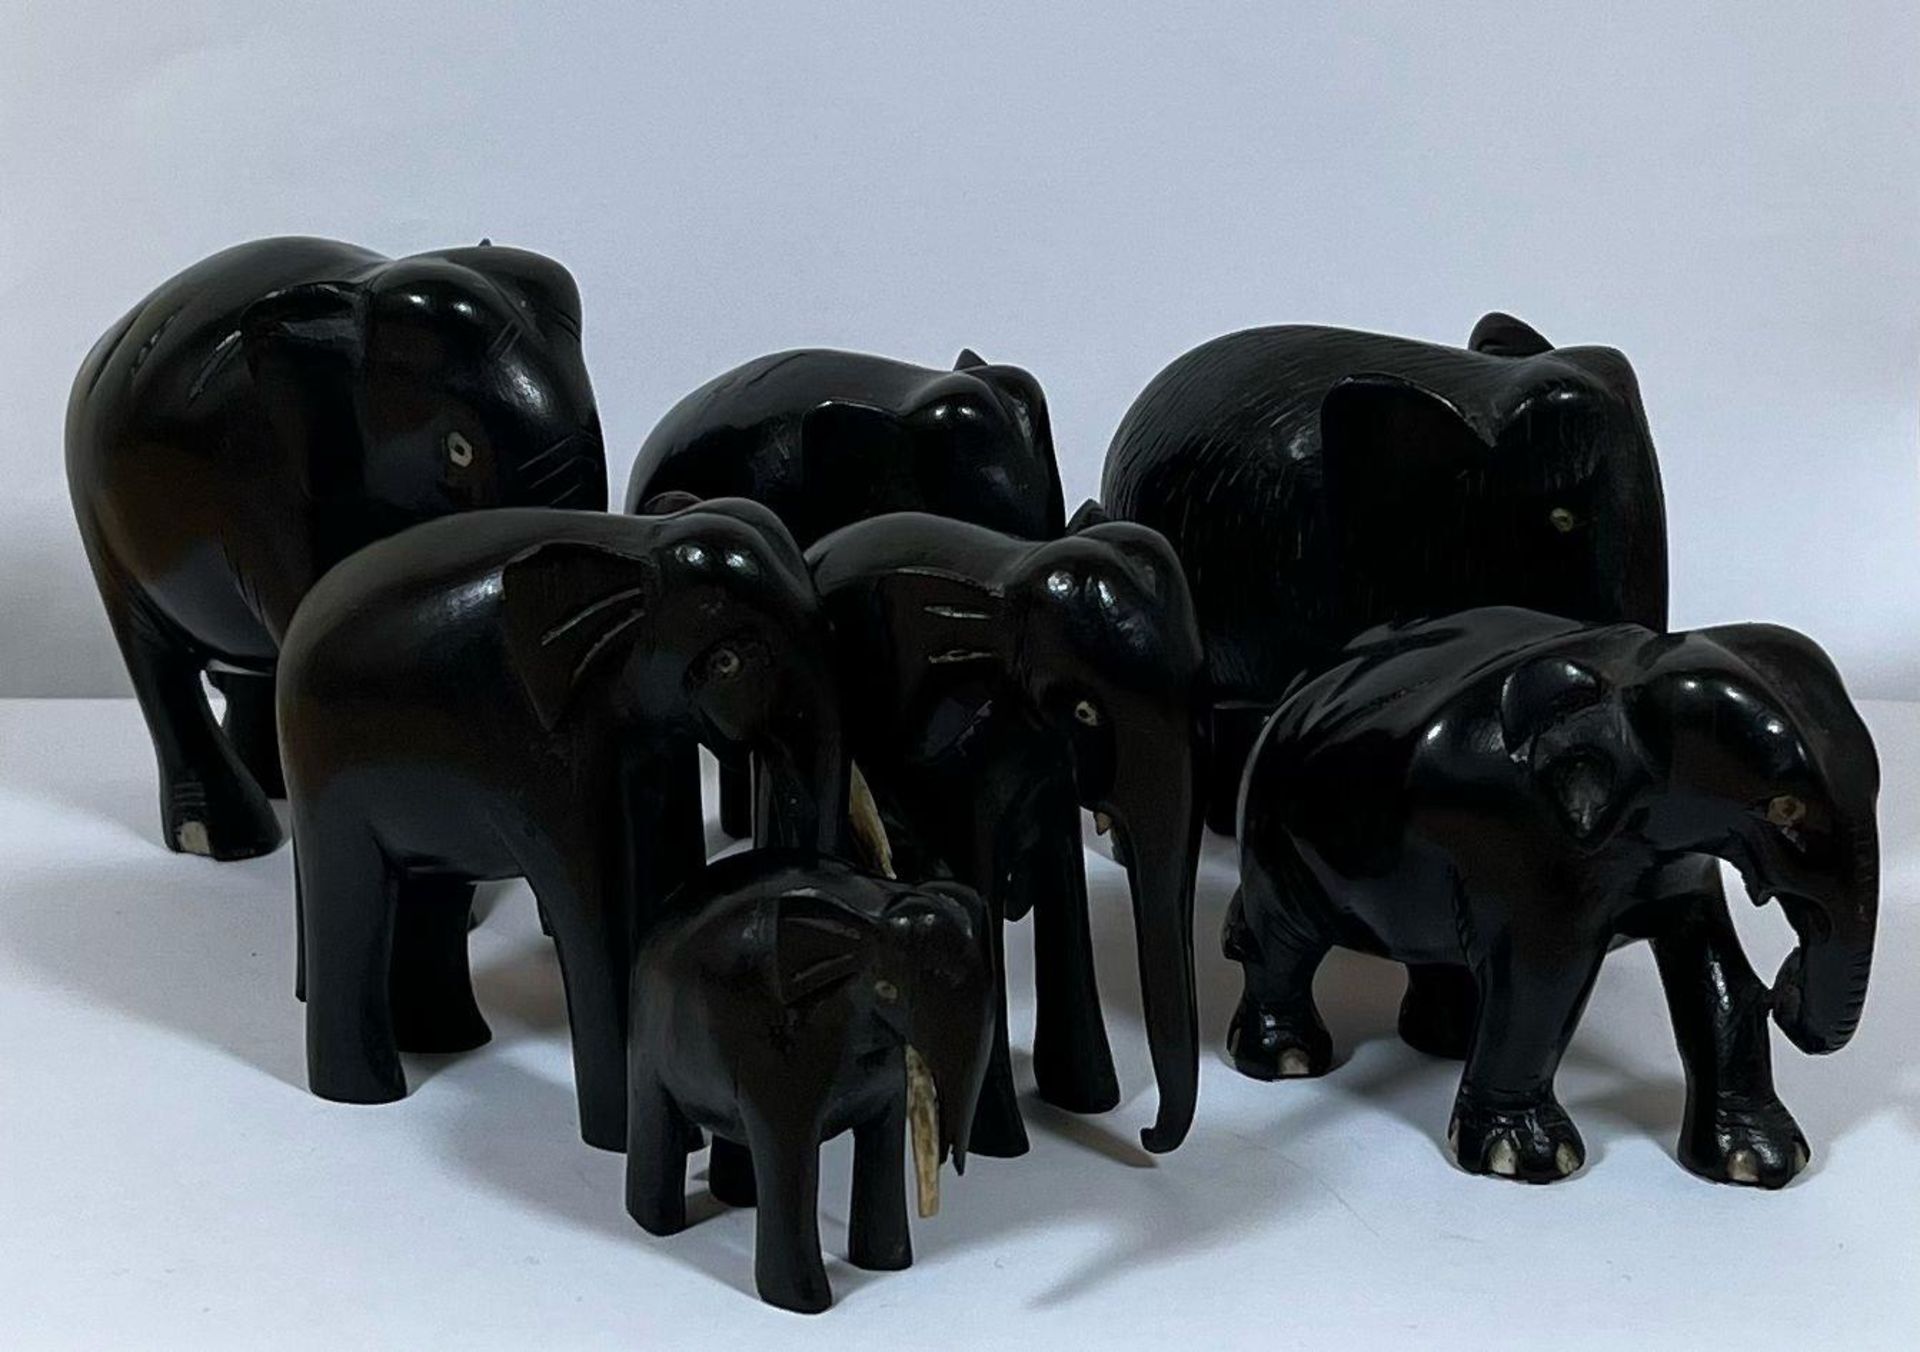 AN ANTIQUE GROUP OF SEVEN EBONY ELEPHANTS, LARGEST 9.5CM HEIGHT